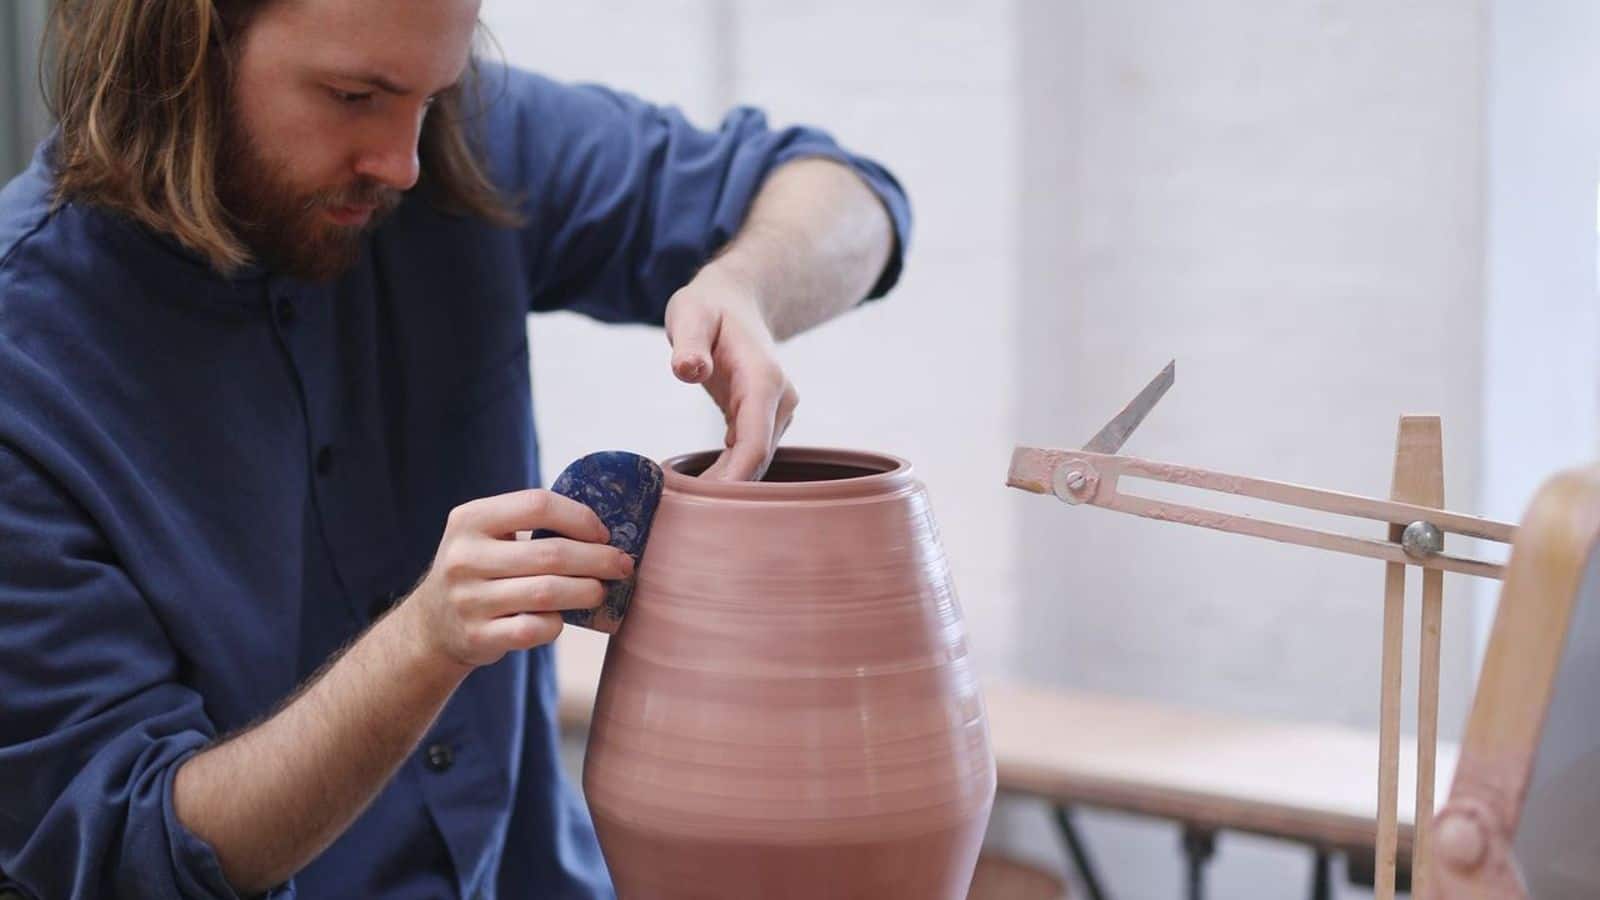 Madrid's hidden artisan workshops: Things to expect